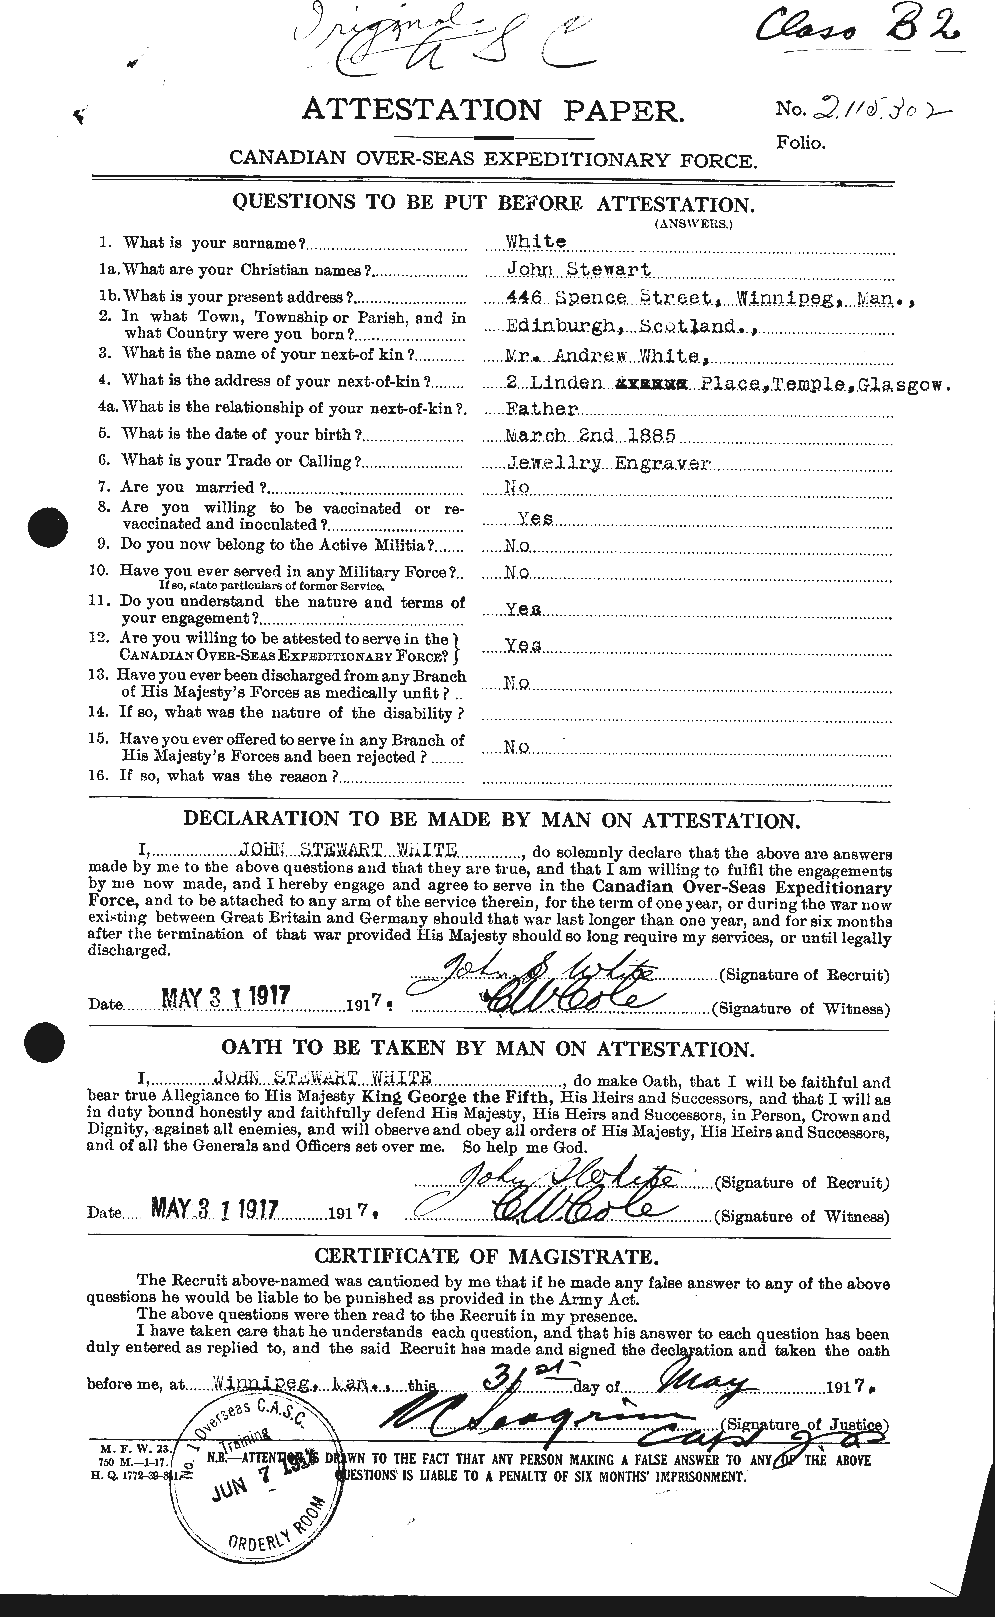 Personnel Records of the First World War - CEF 671603a